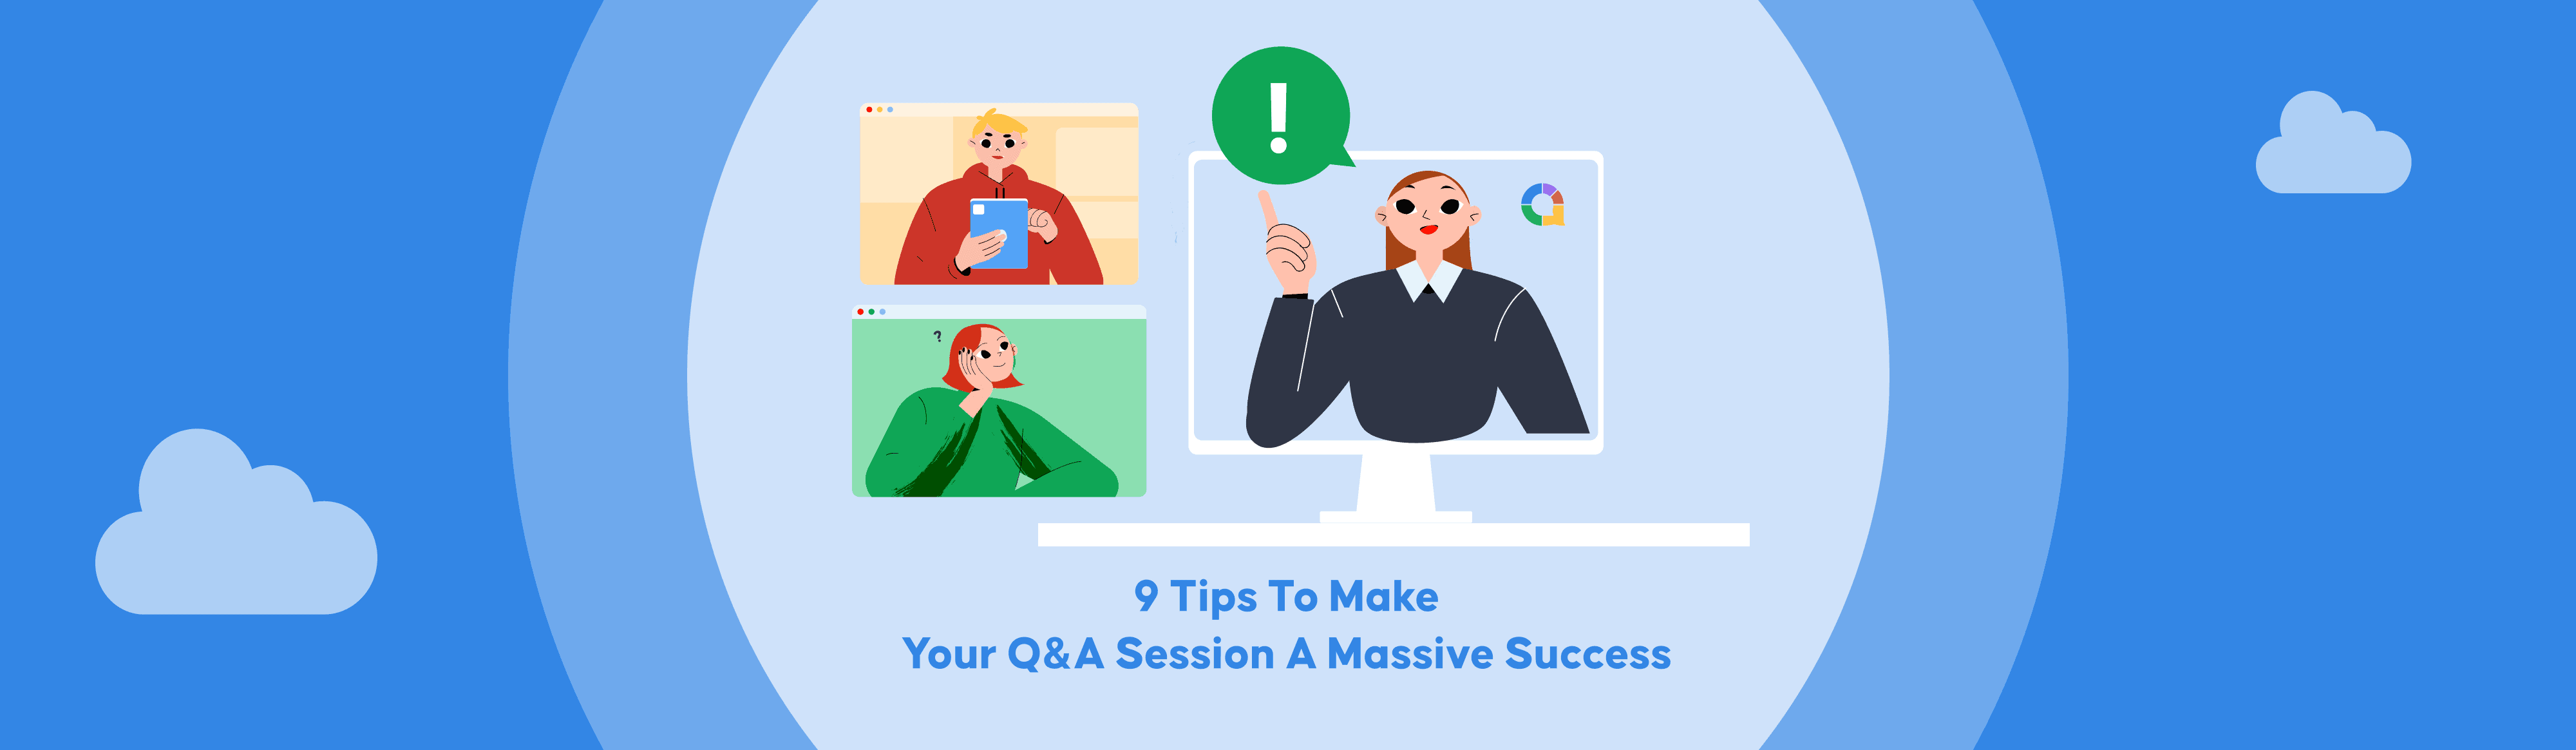 9 Tips To Make Your Q&A Session A Massive Success in 2023